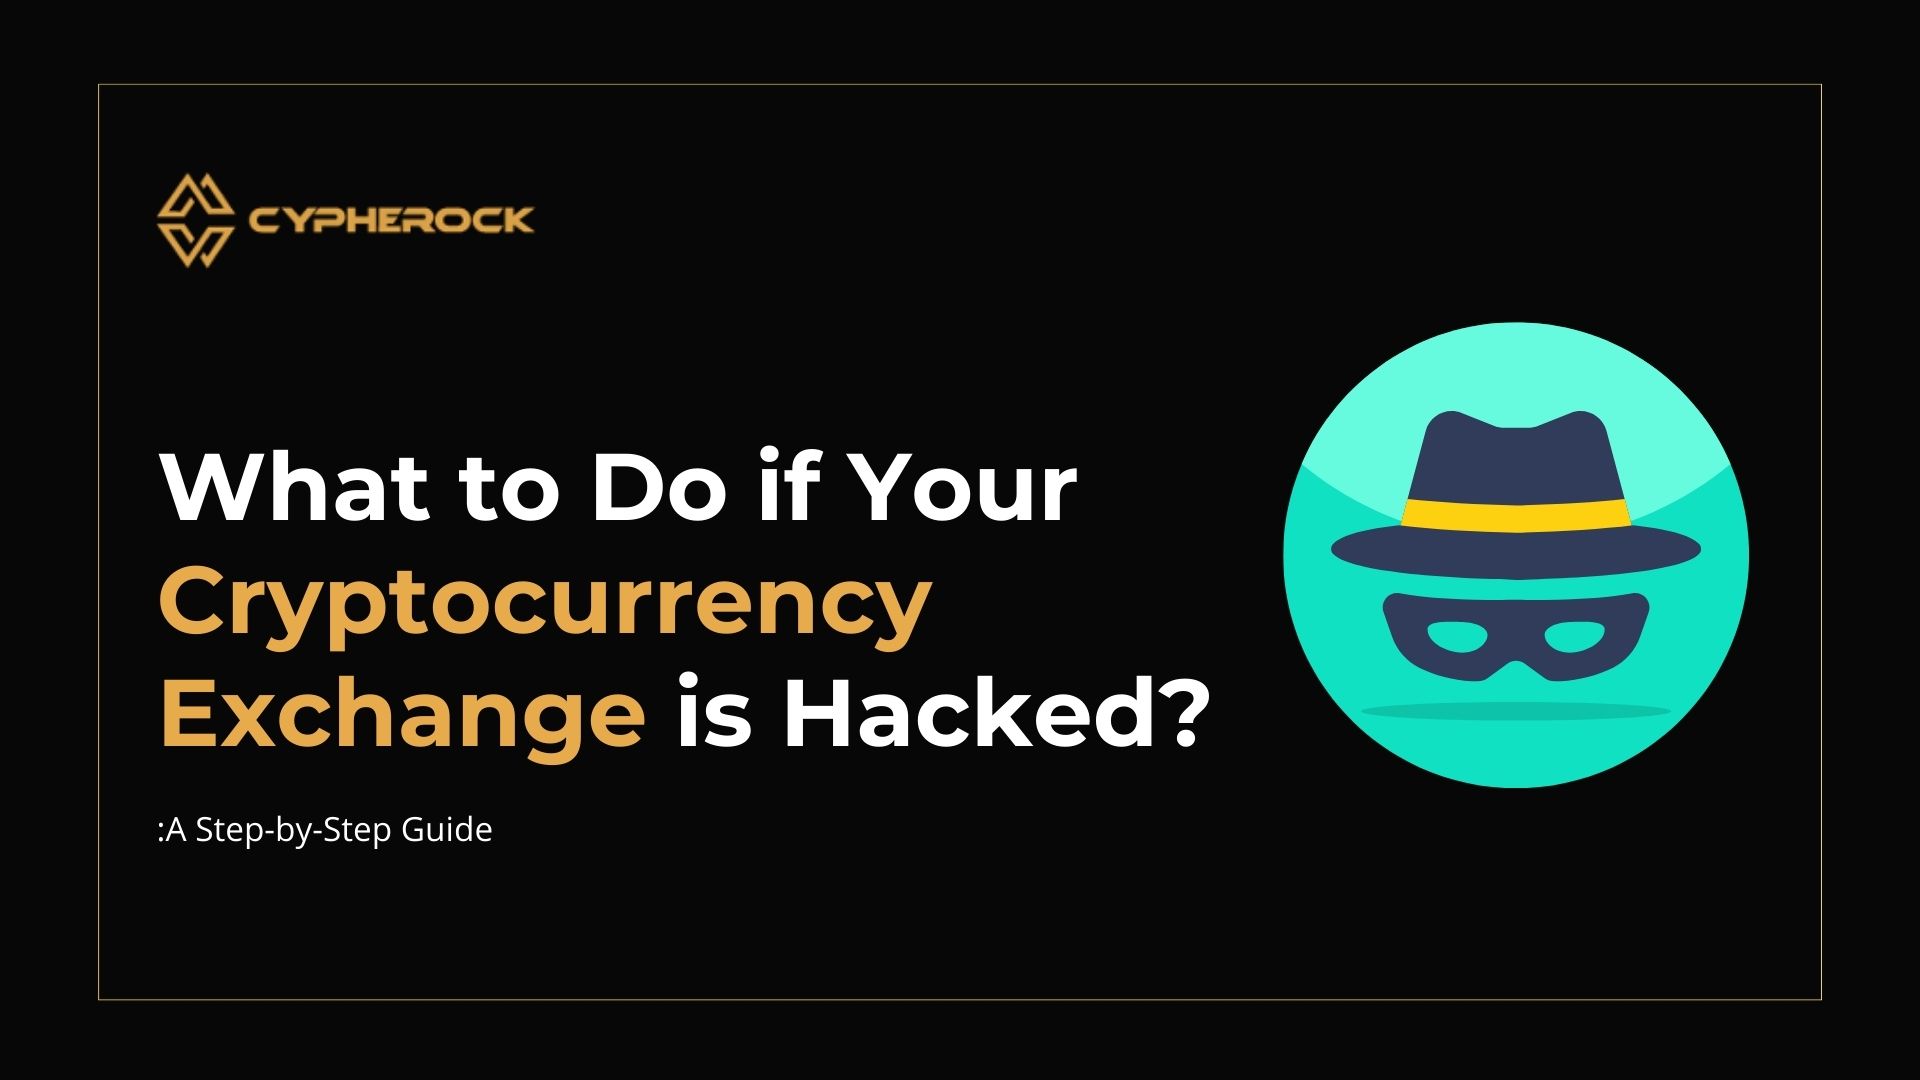 What to Do if Your Cryptocurrency Exchange is Hacked?: A Step-by-Step Guide